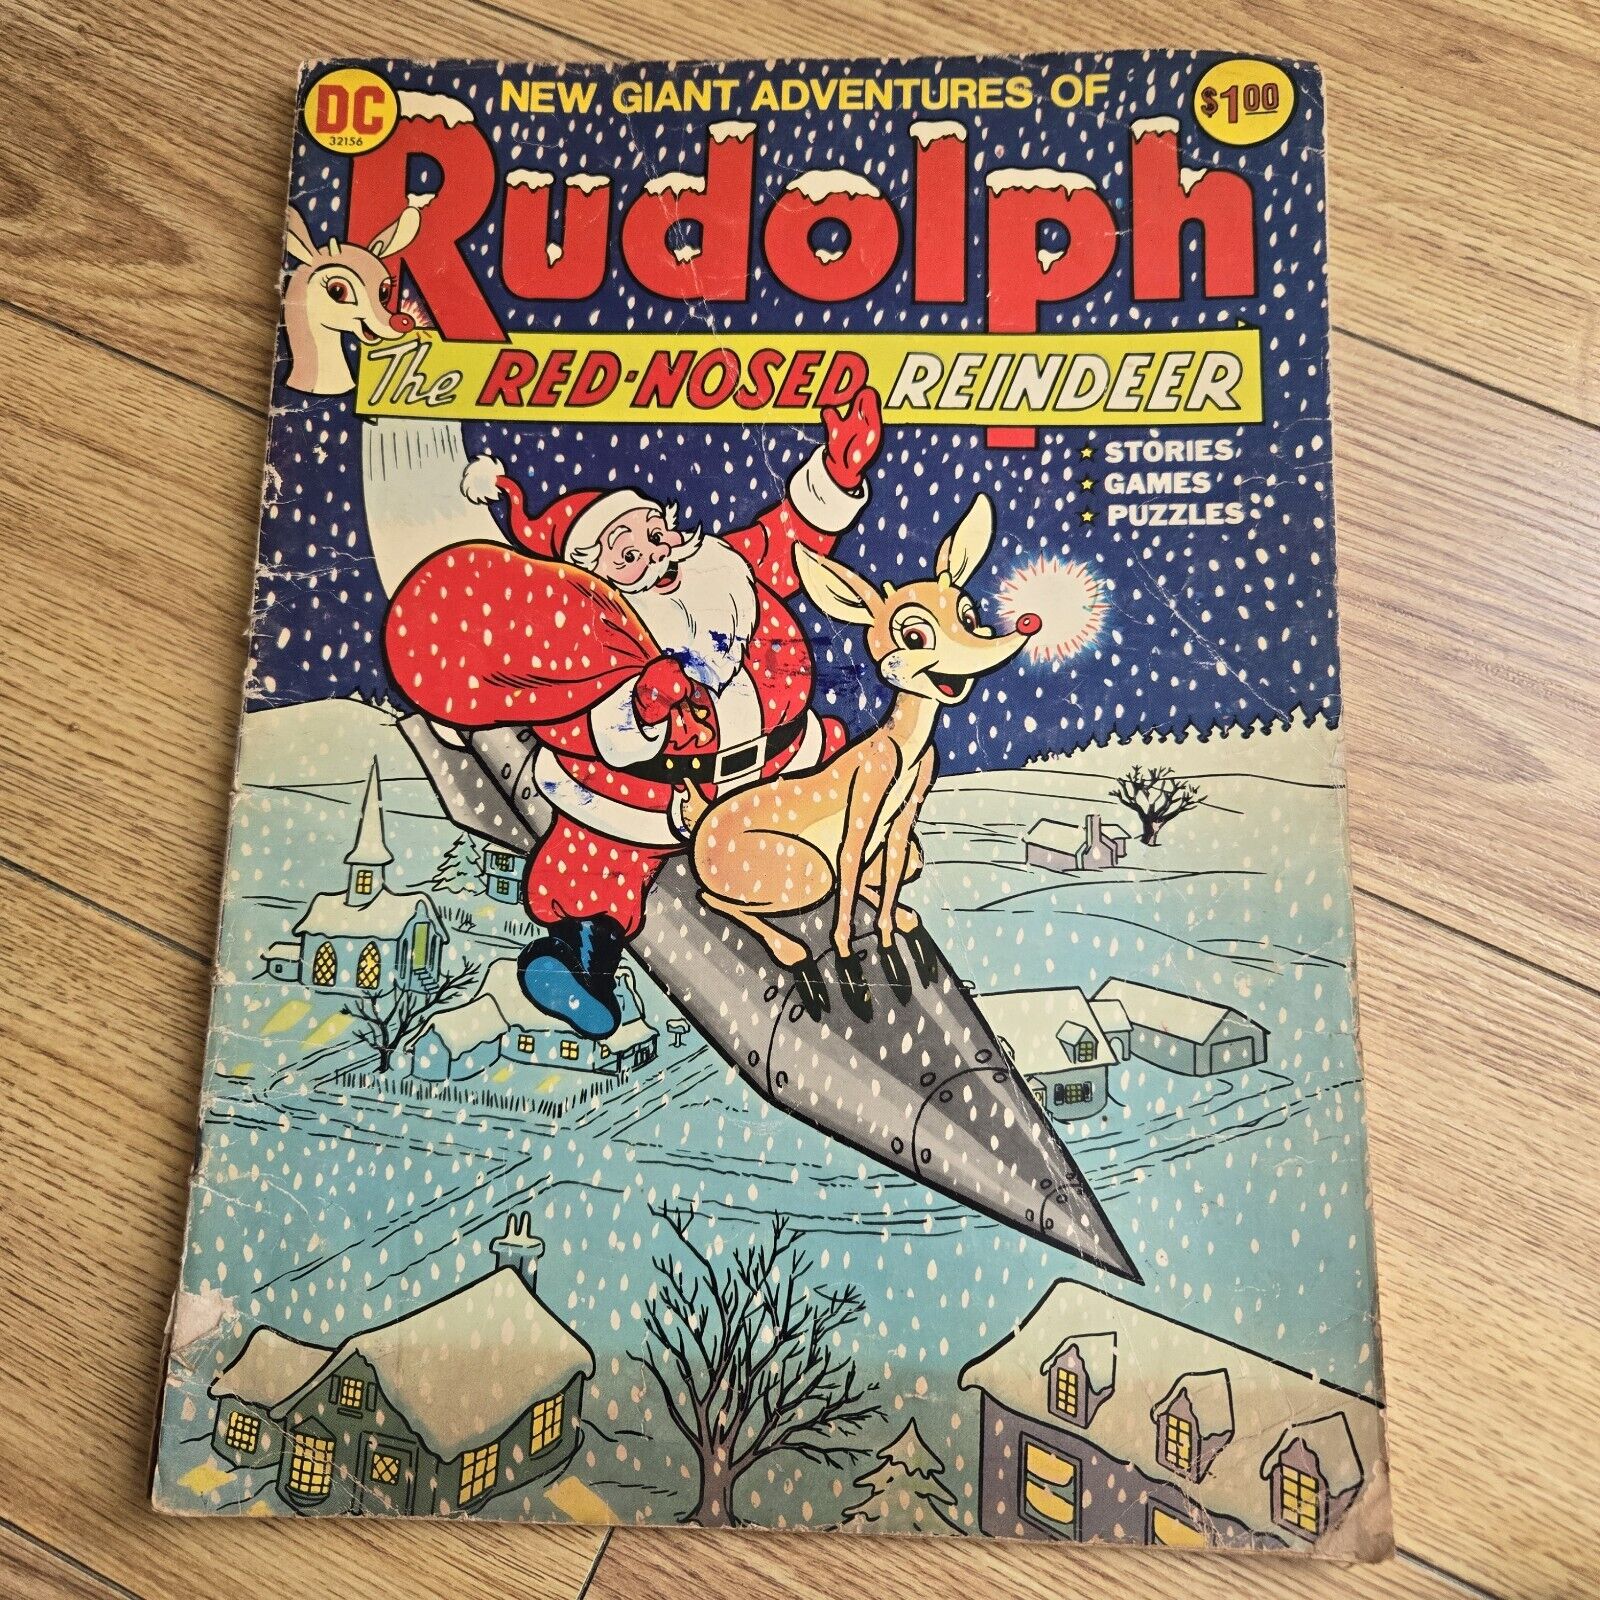 RARE VTG DC COMICS: RUDOLPH THE RED-NOSED REINDEER, GIANT ADVENTURES Christmas 